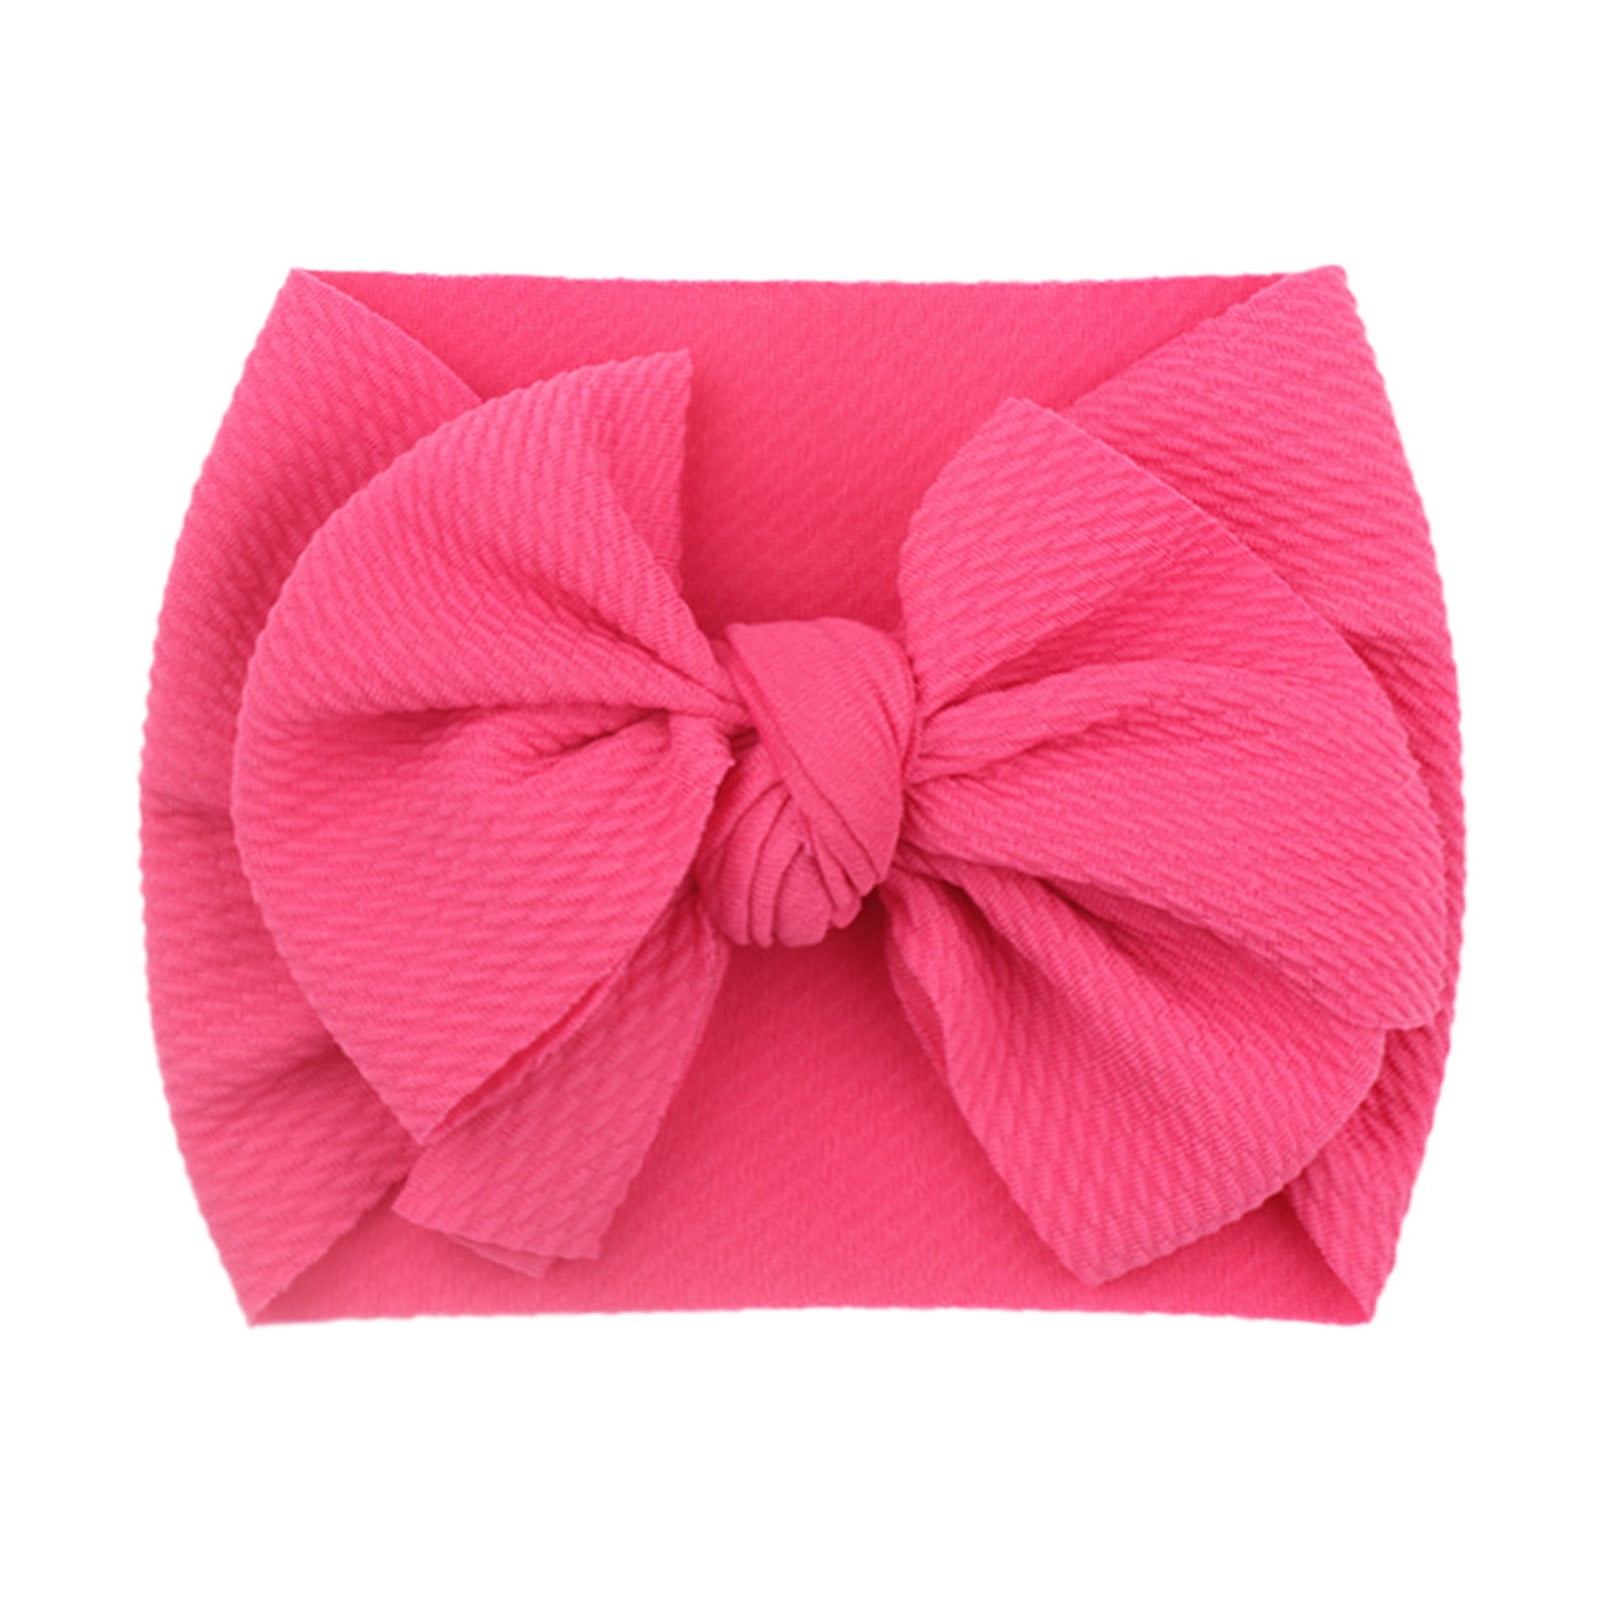 Hairband Bowknot Girls Headband 1PC Stretch Toddler Headwear Baby Kids Hair  accessories Popular Things for 11 Year Old Girls